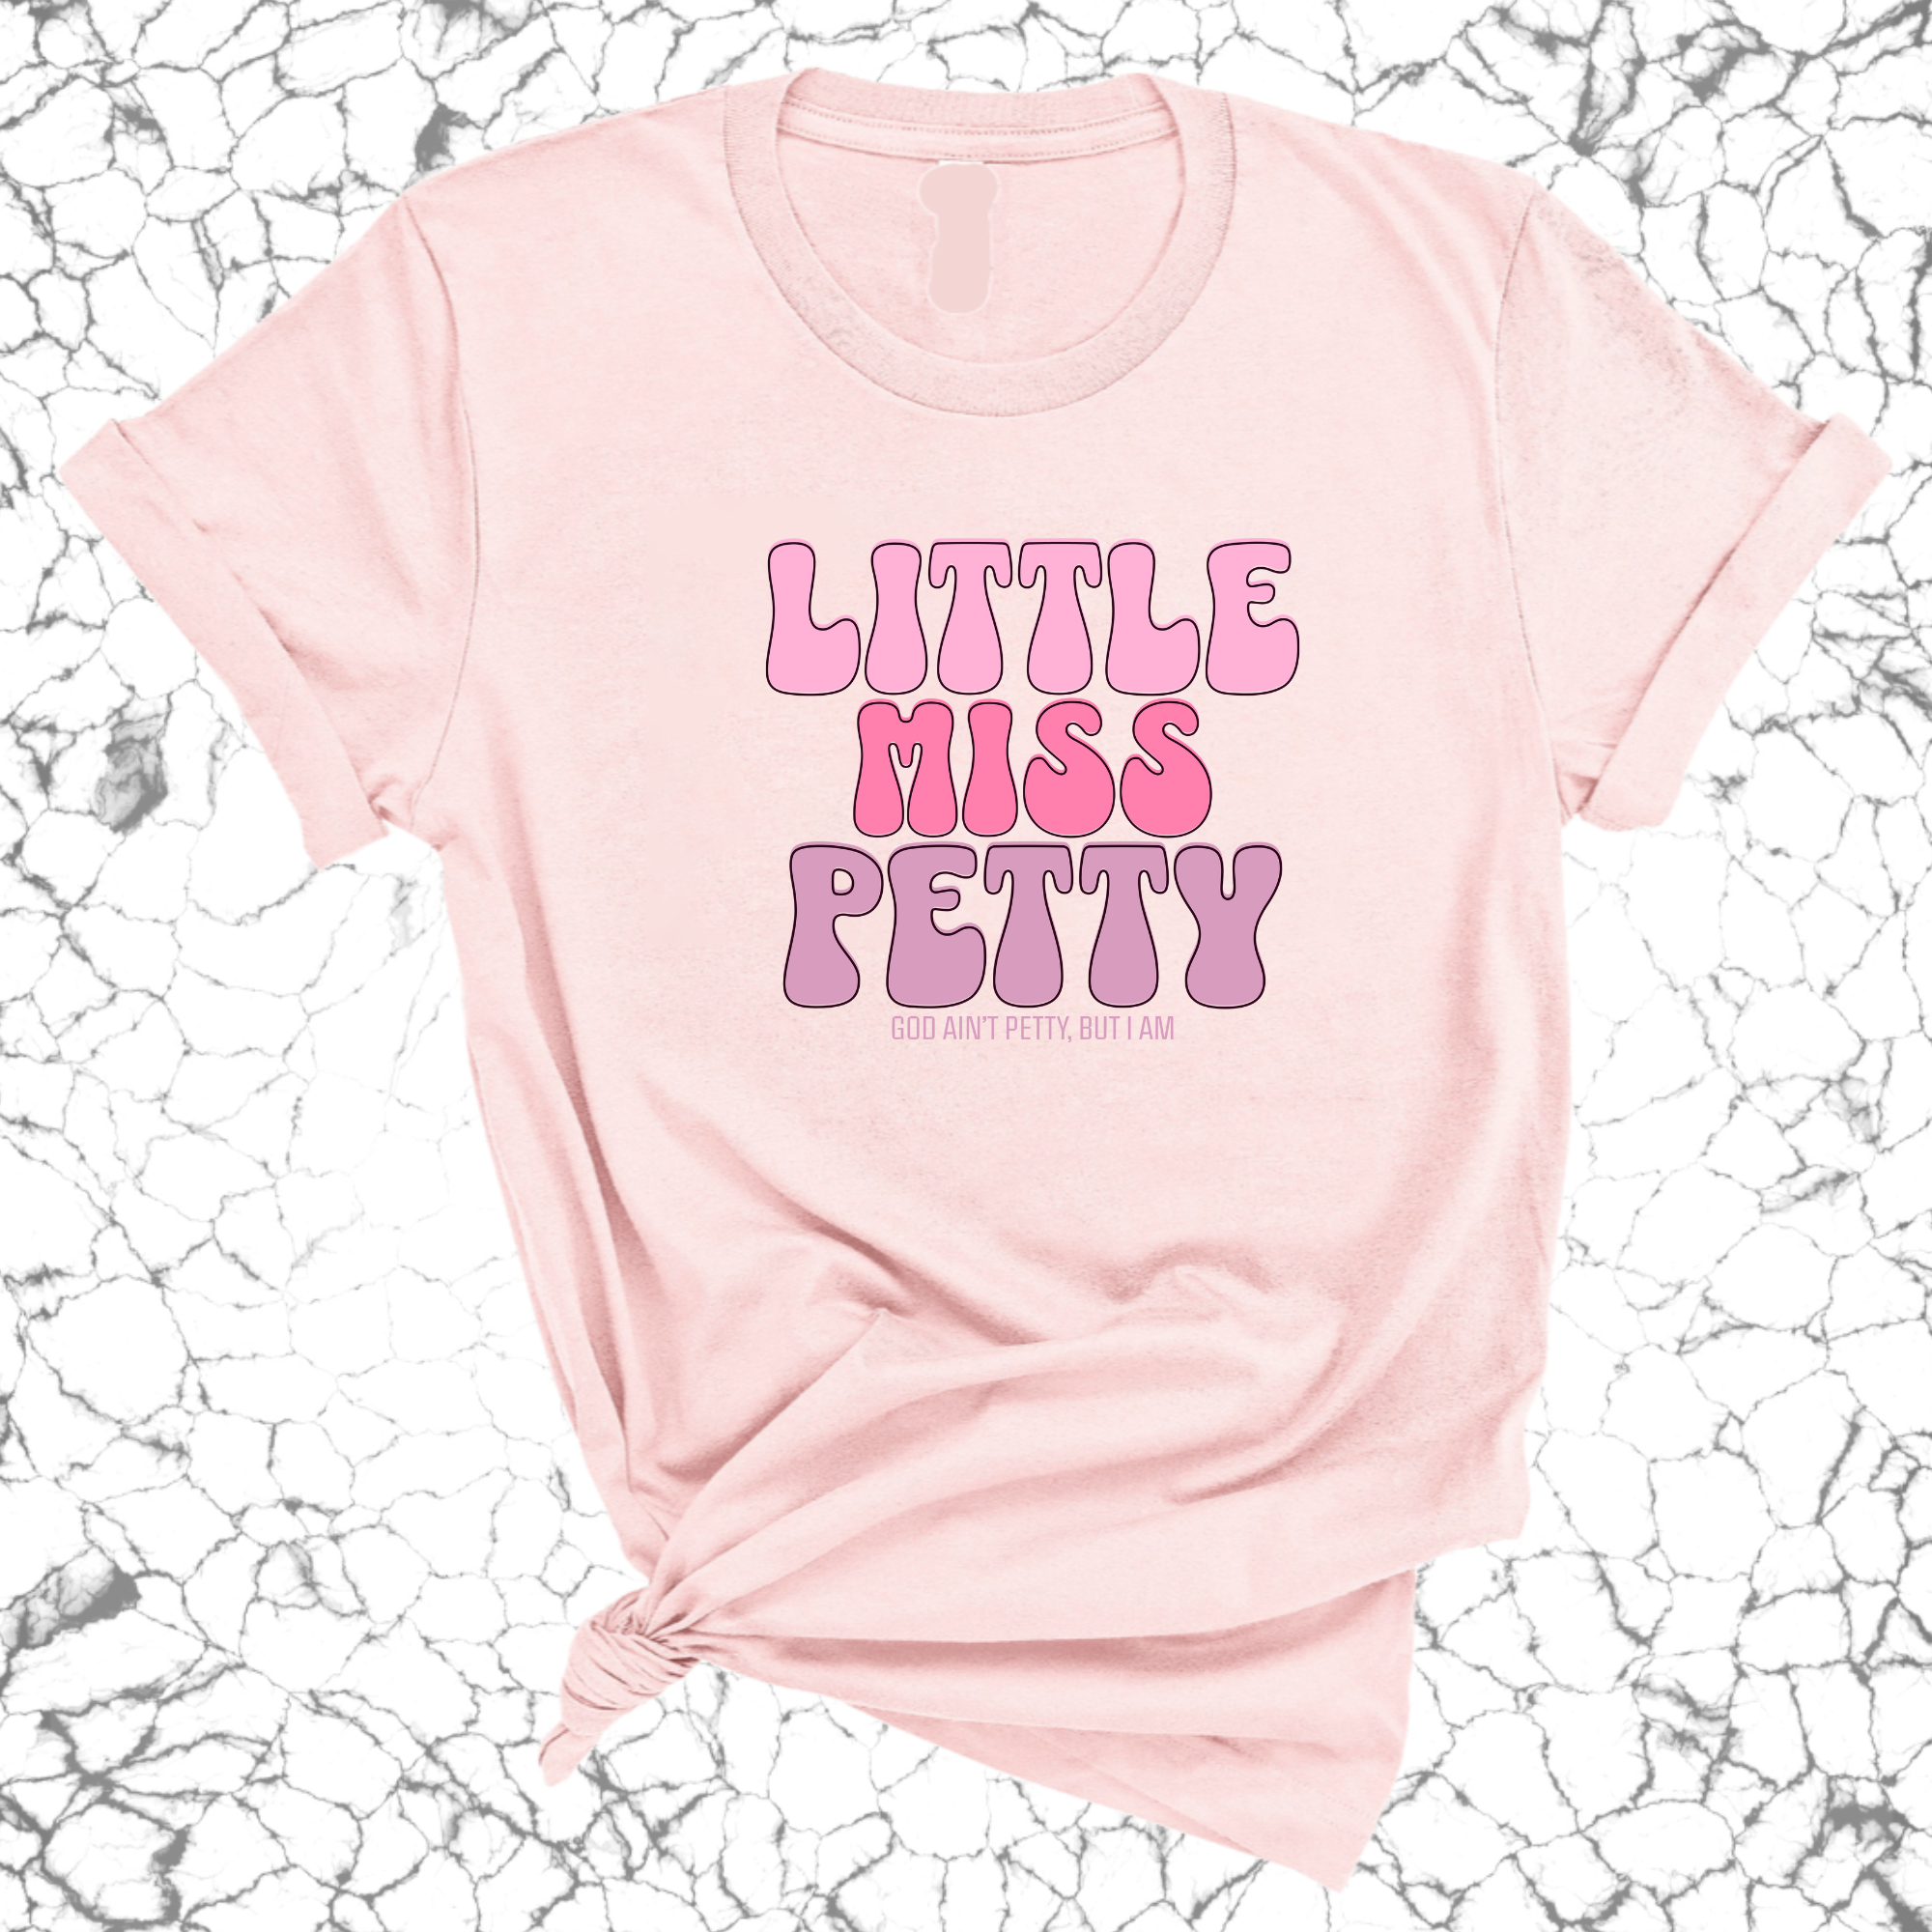 Little Miss Petty Unisex Tee ( Pink Letters)-T-Shirt-The Original God Ain't Petty But I Am